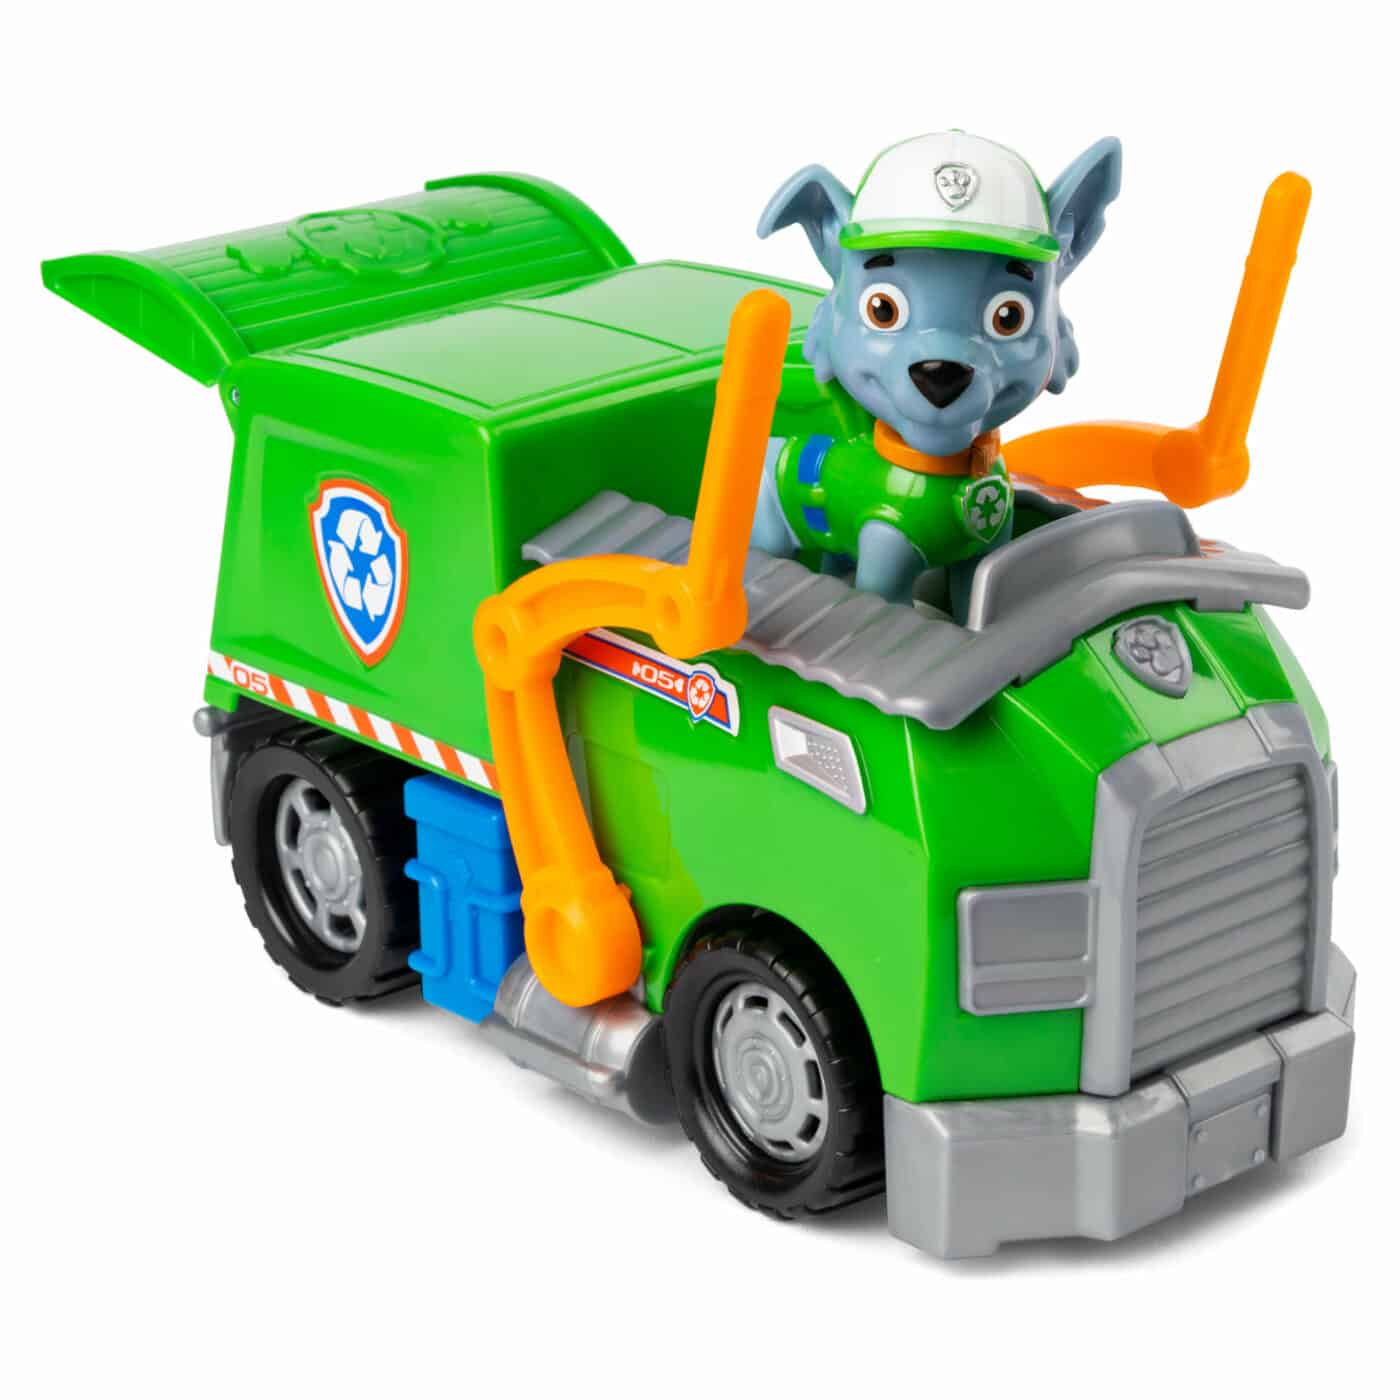 Nickelodeon - Paw Patrol Vehicle - Rocky Recycle Truck3